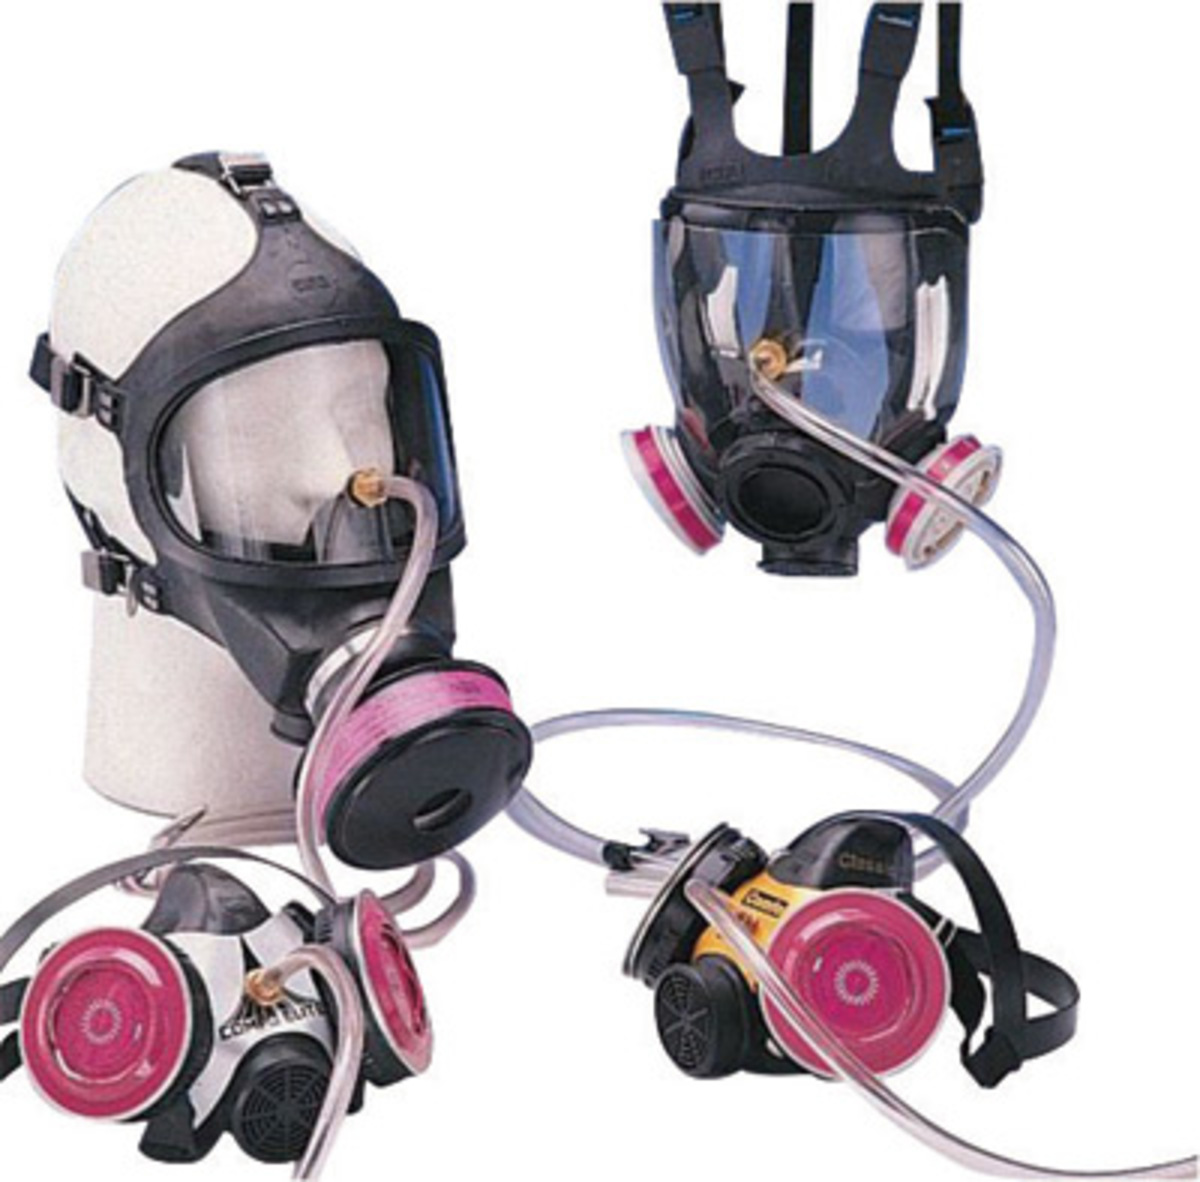 MSA Small Comfo Classic® Series Full Mask Air Purifying Respirator (Availability restrictions apply.)